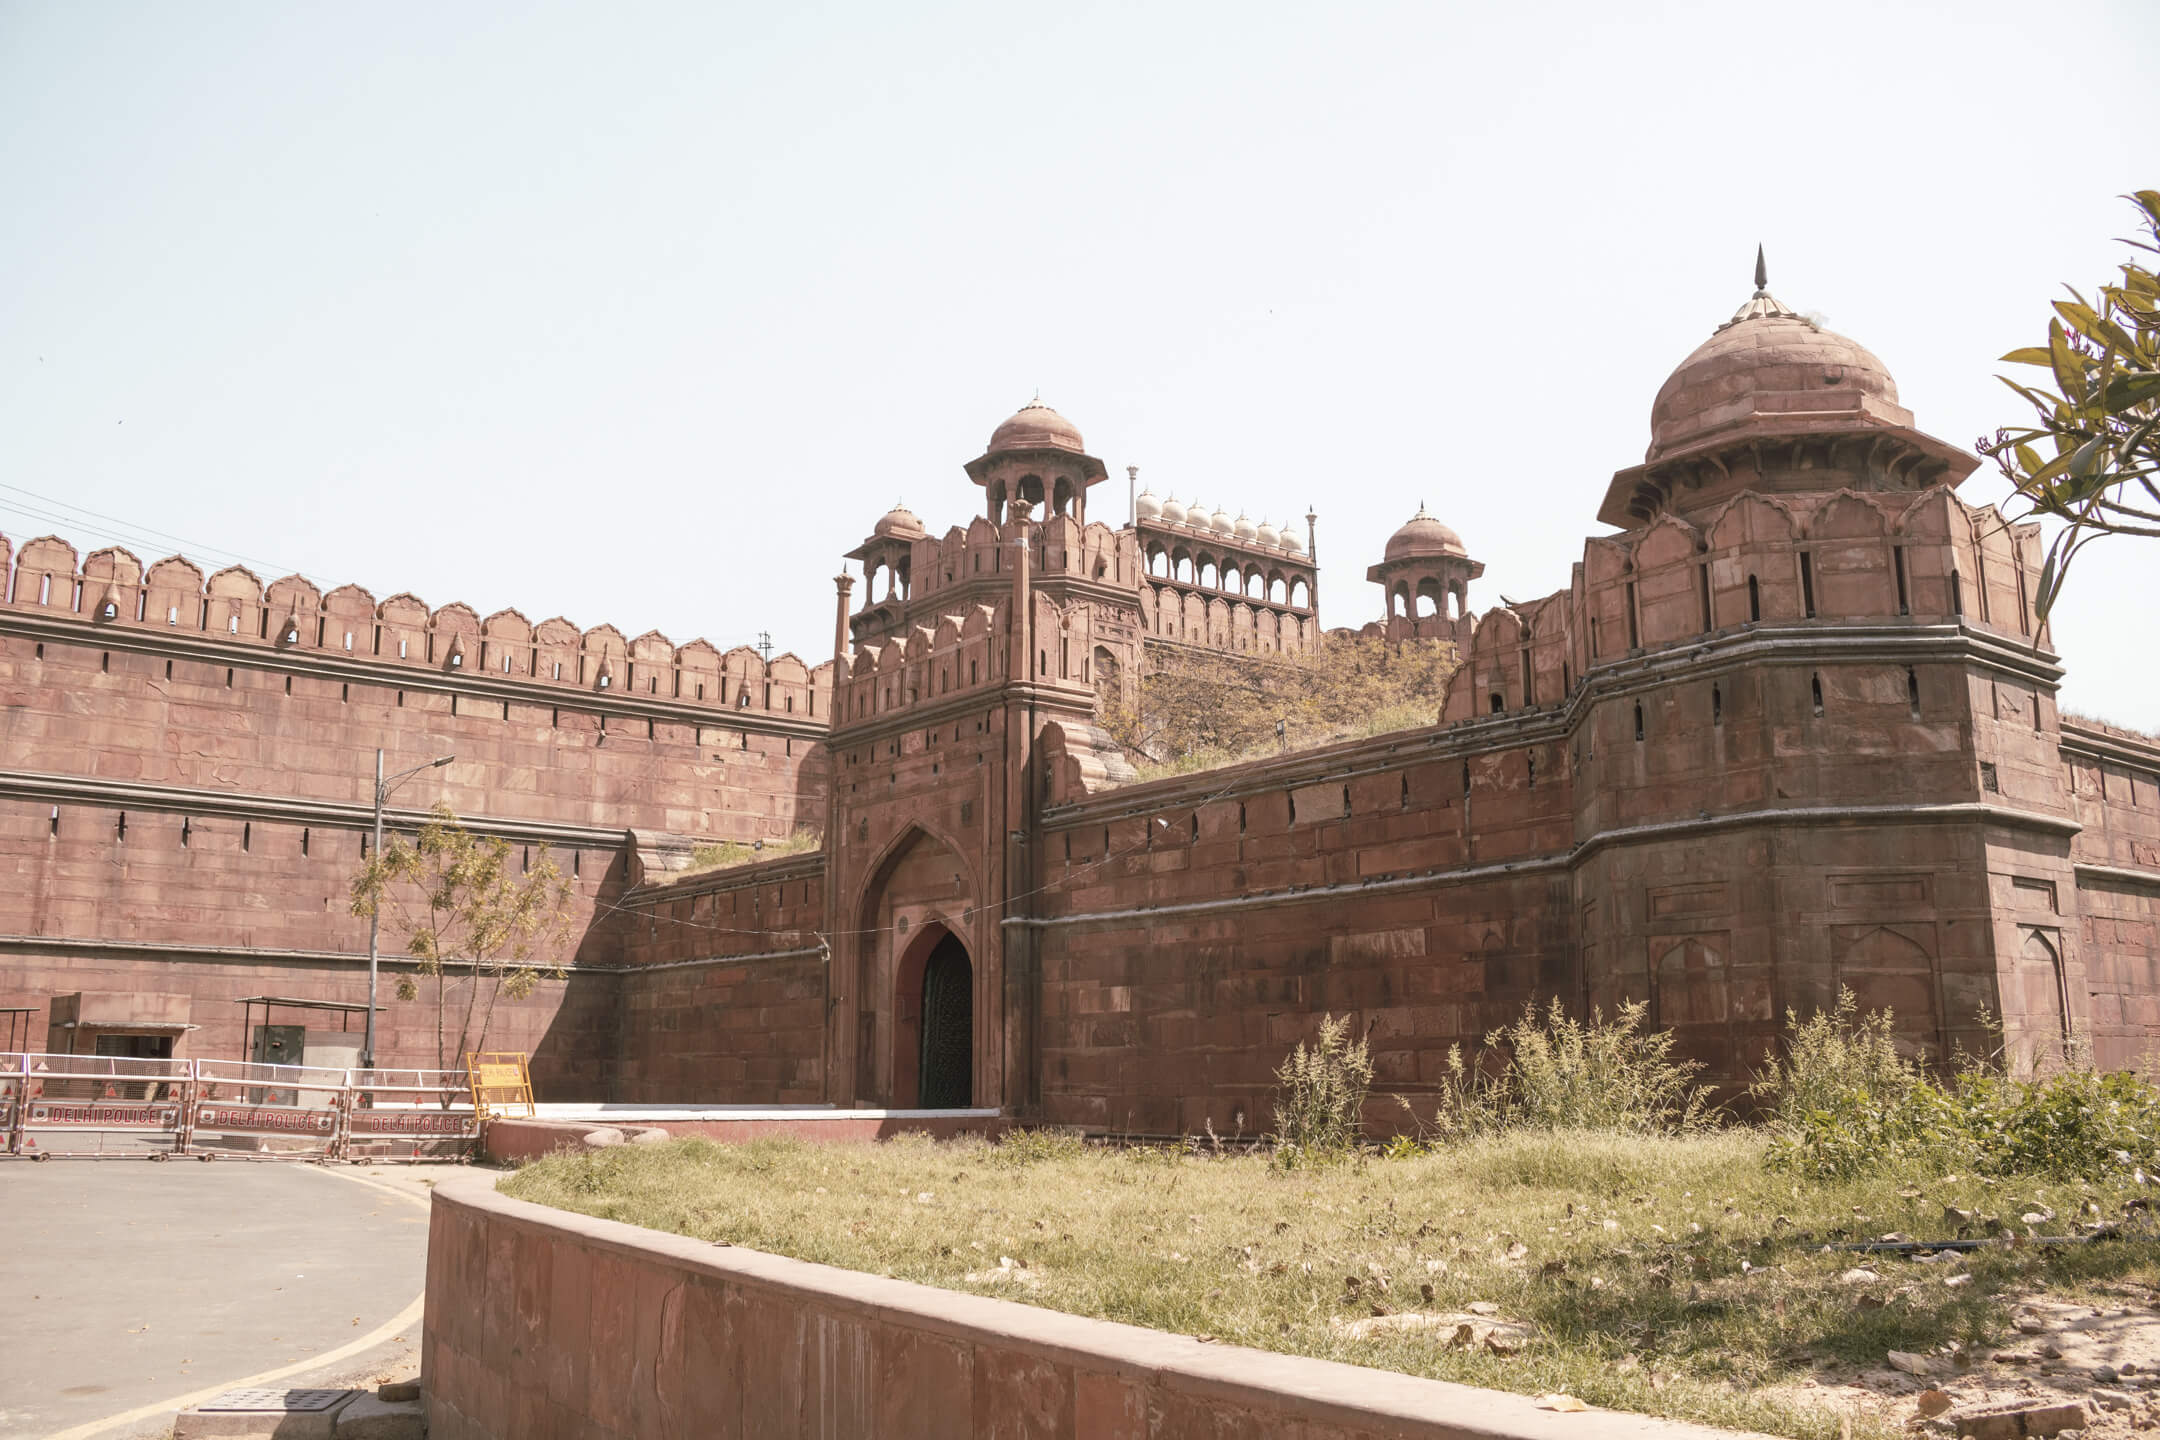 The Red Fort in New Delhi, India